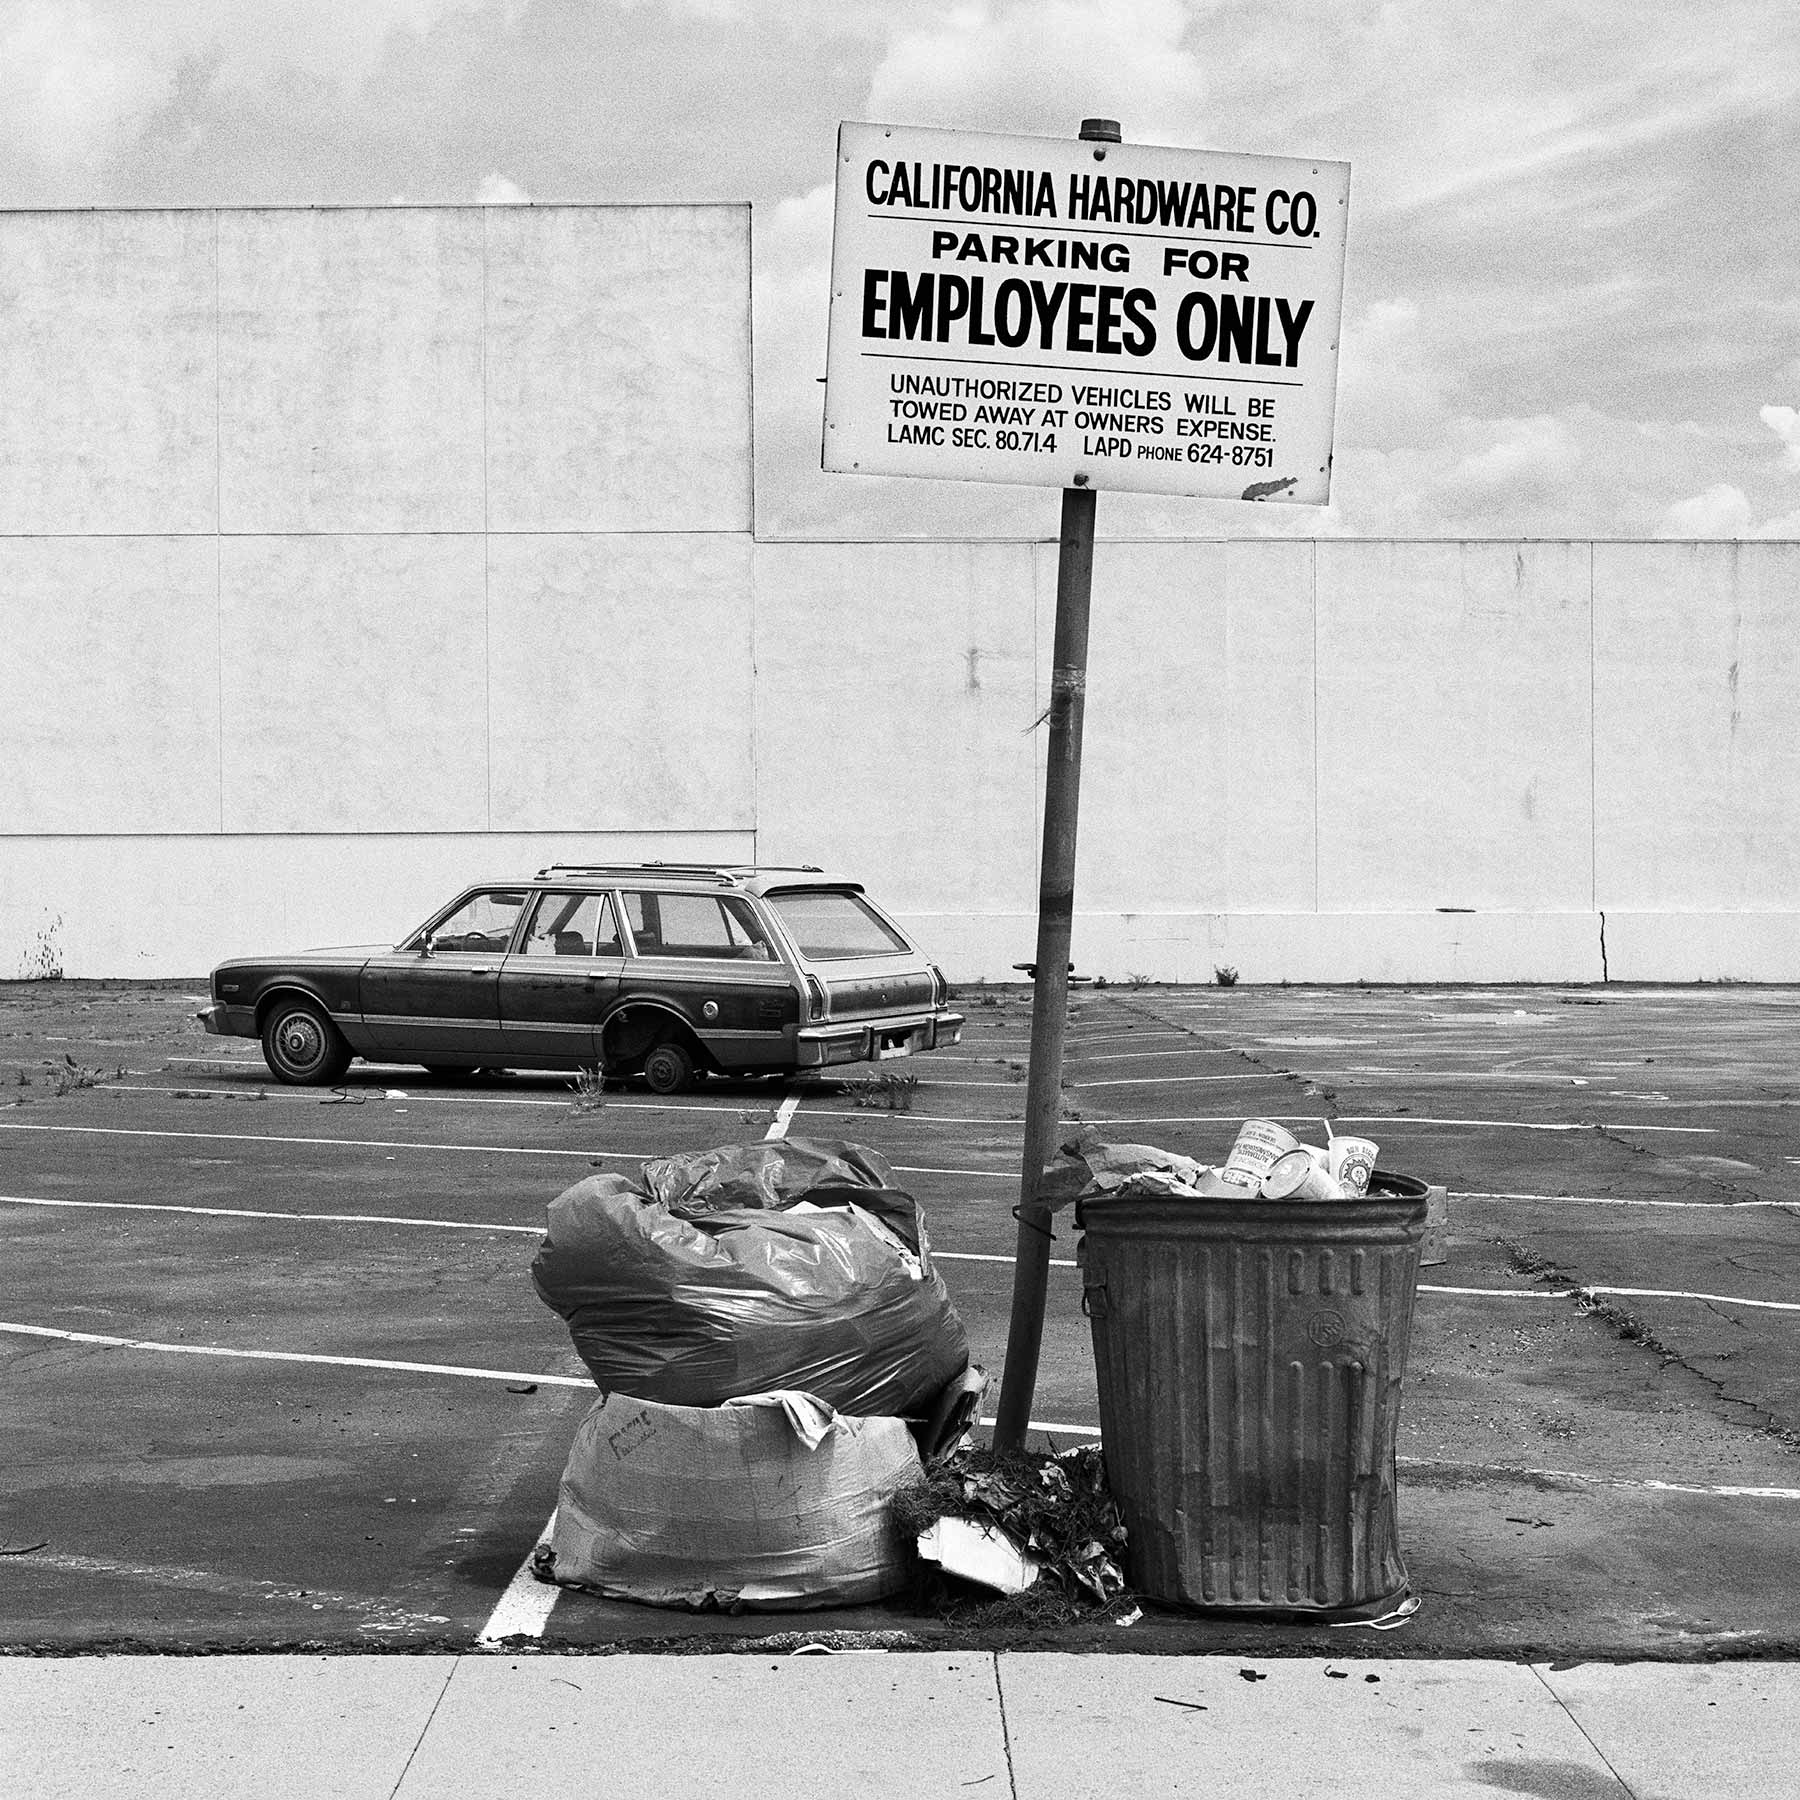 Car with missing wheel – Arts District, Los Angeles, California, 1983